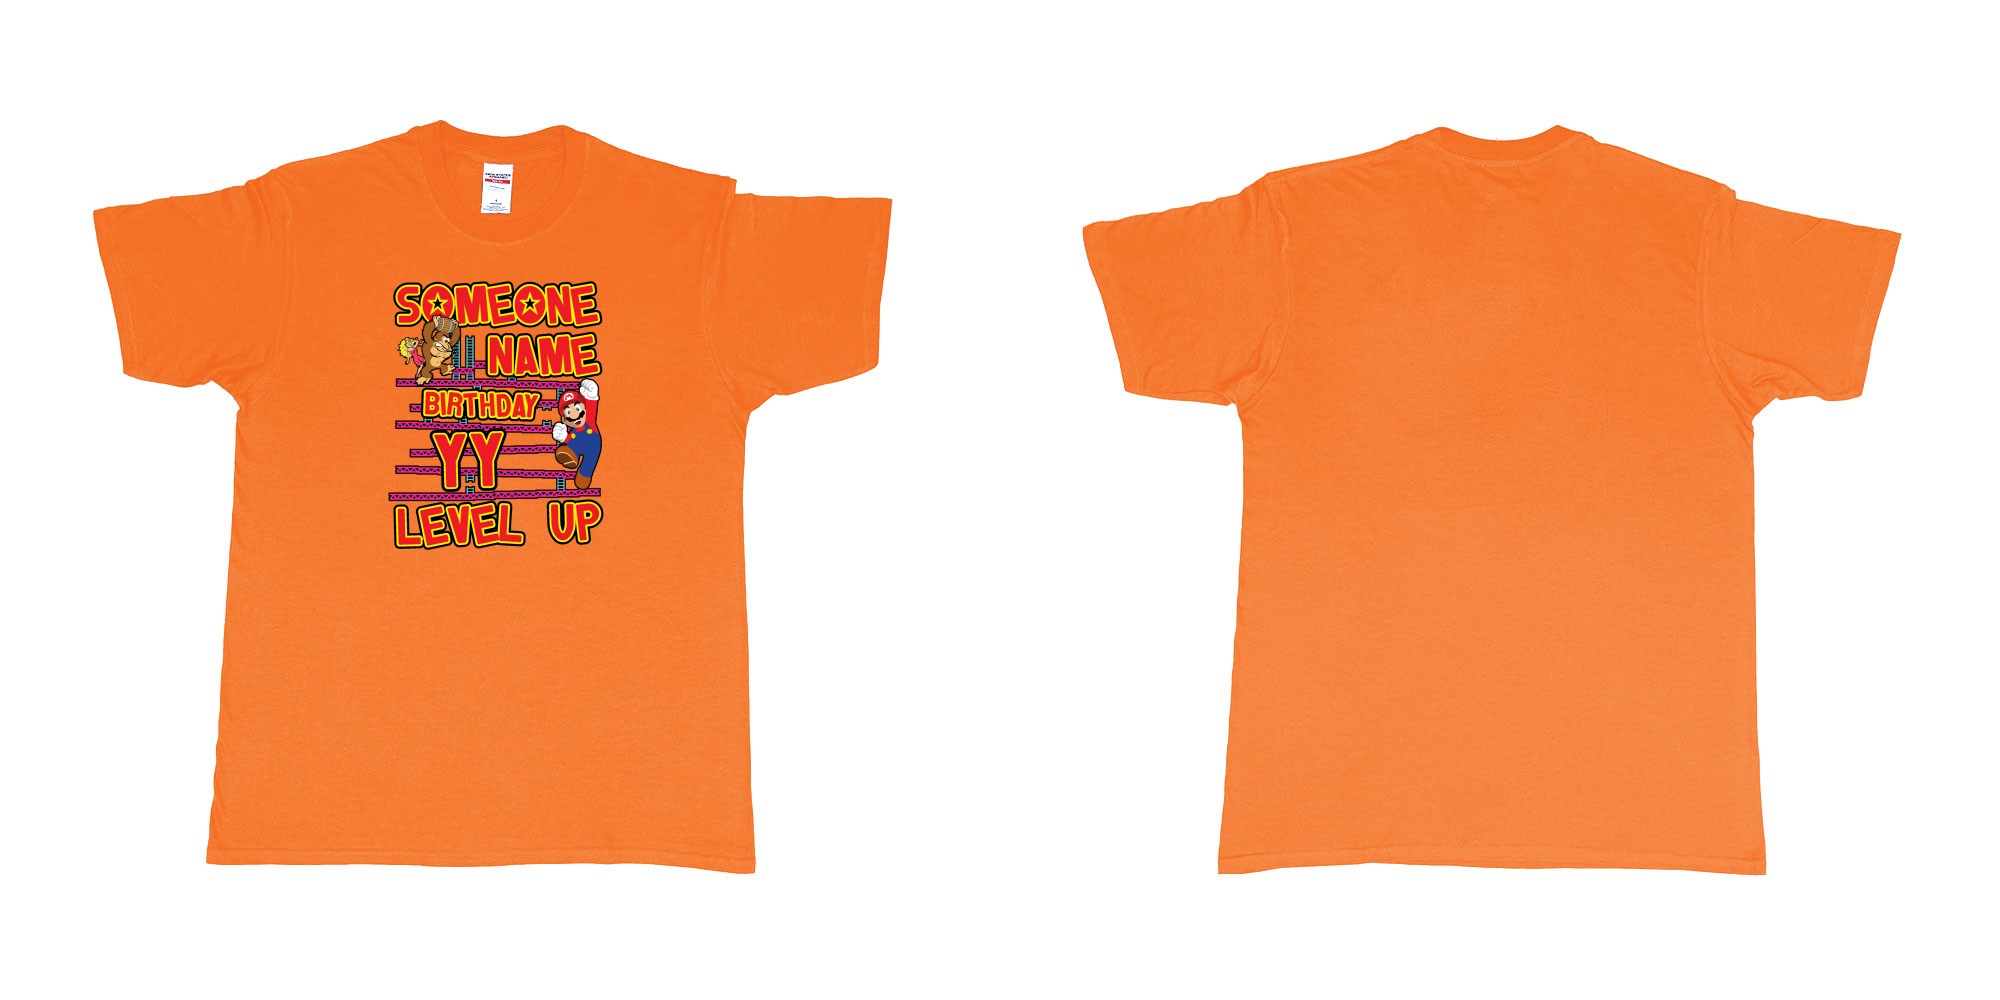 Custom tshirt design donkey kong classic arcade game custom birthday t shirt digital printing bali in fabric color orange choice your own text made in Bali by The Pirate Way